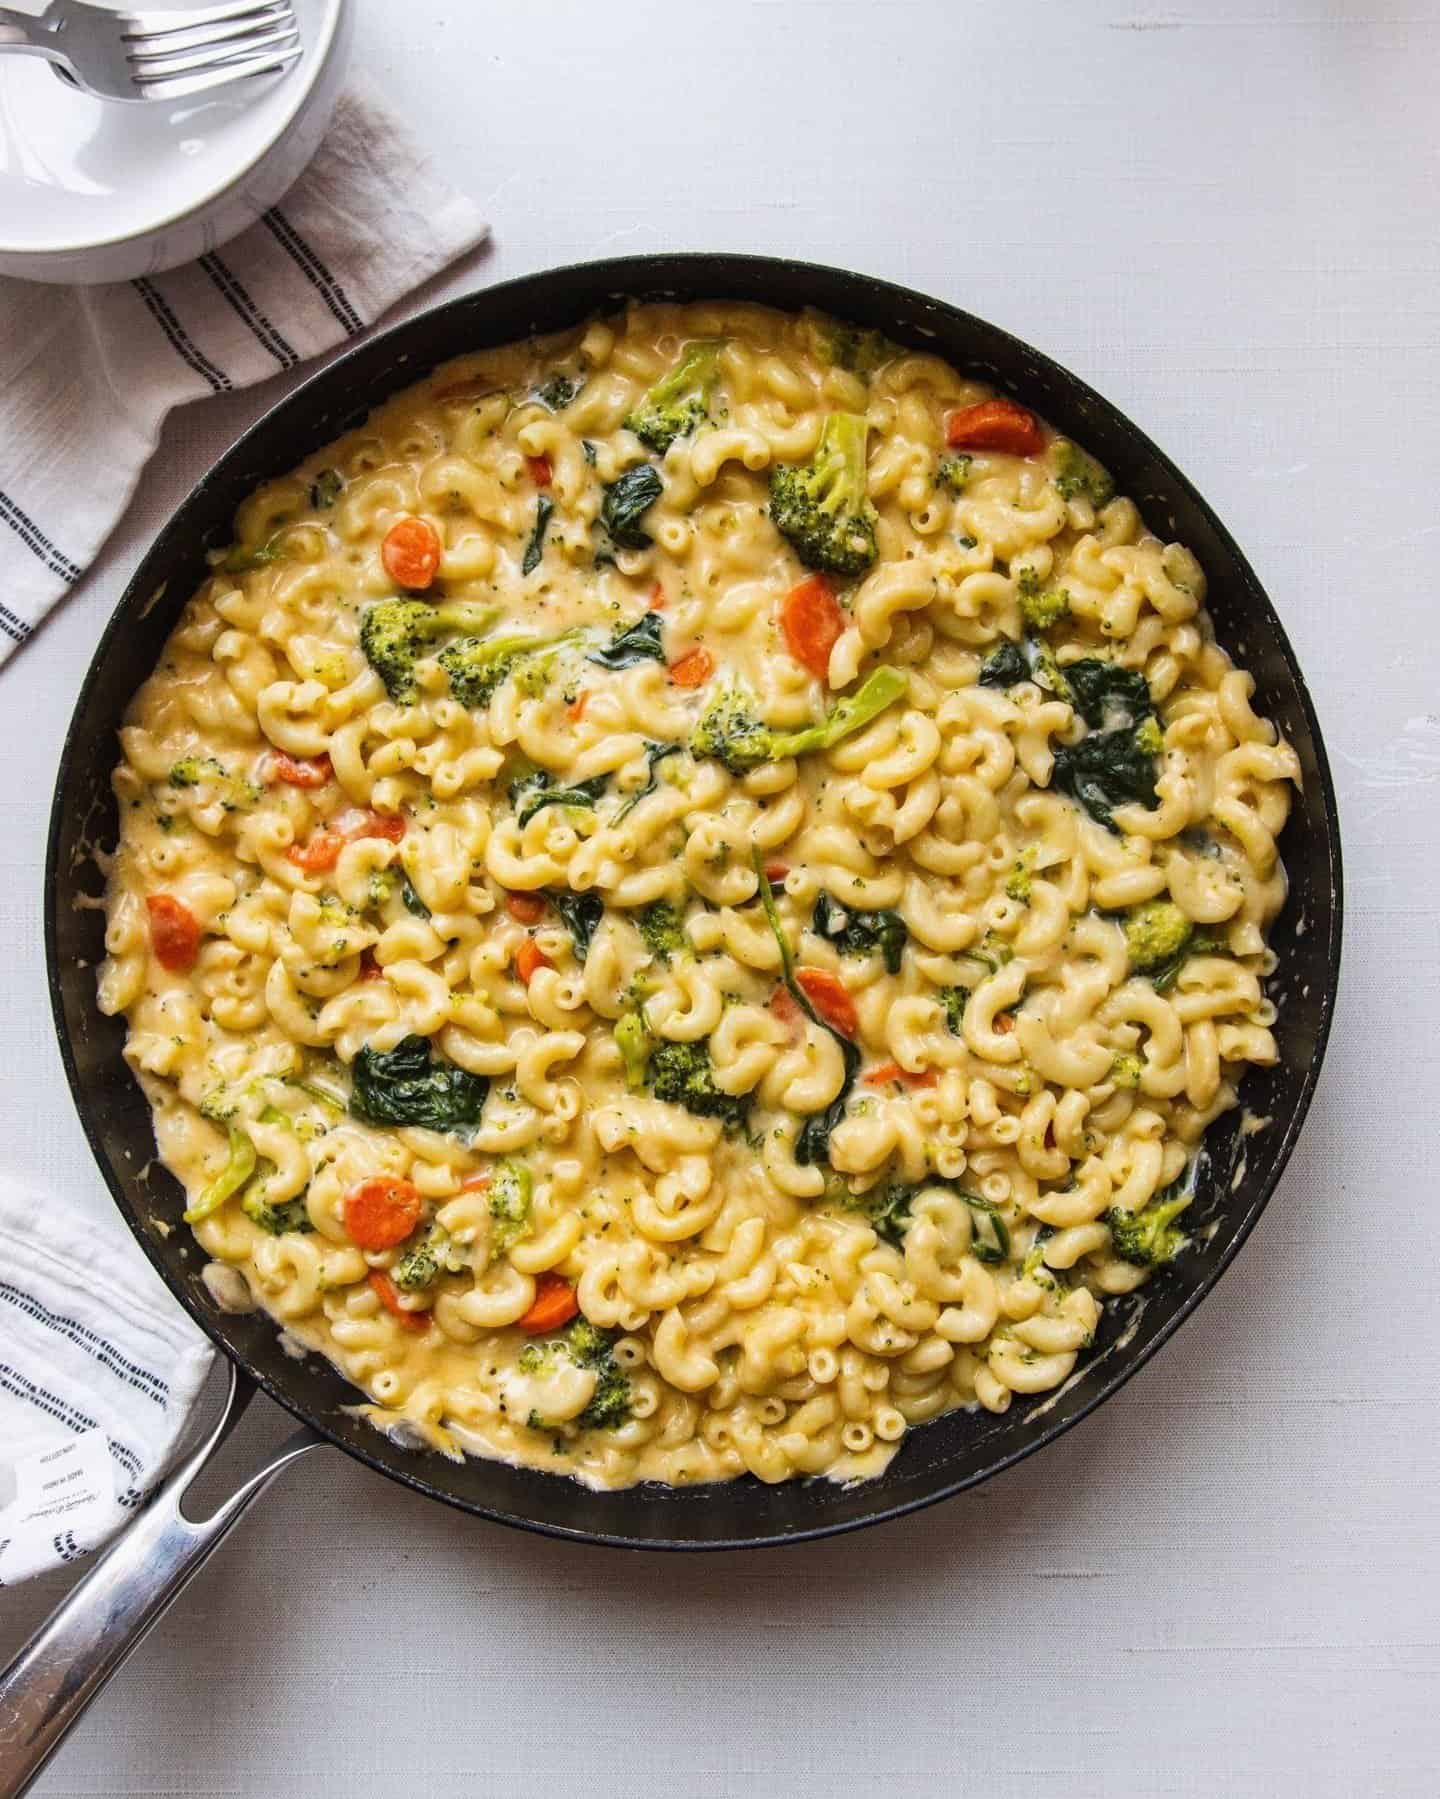 This stovetop mac and cheese only takes 20 minutes and is packed with broccoli, carrots, spinach, and two types of cheese.⁣
⁣
Recipe linked in the bio! 🥦🥕🧀⁣
⁣
#easyrecipes #food52 #thekitchn #buzzfeedfood #feedfeed #bhgfood #todayfood #quickdinner #dinnerideas #dinnerrecipes #easydinner #Macandcheese #veggies